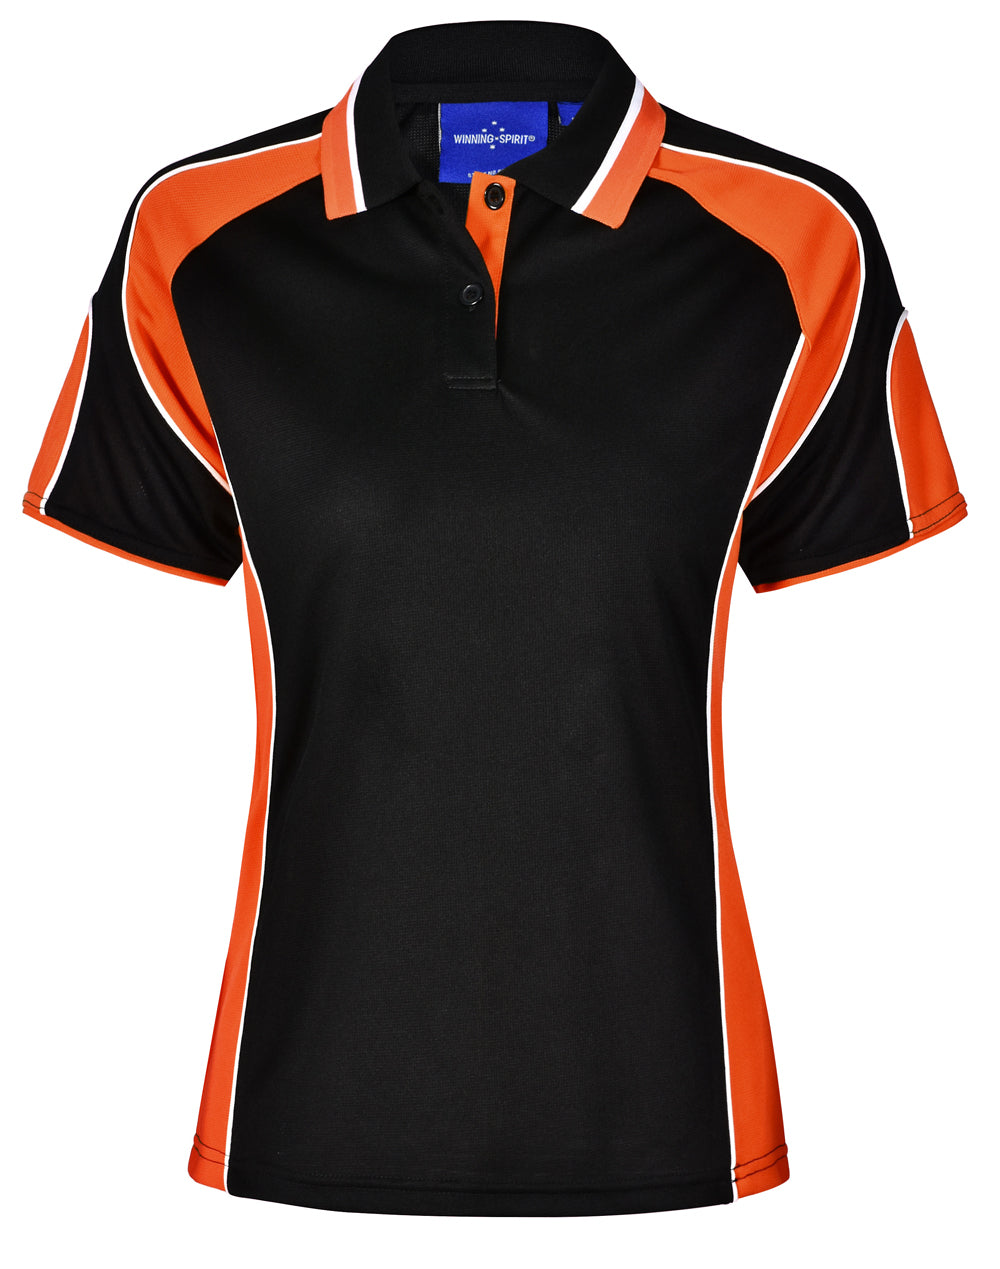 Ladies Contrast Short Sleeve Polo - made by AIW